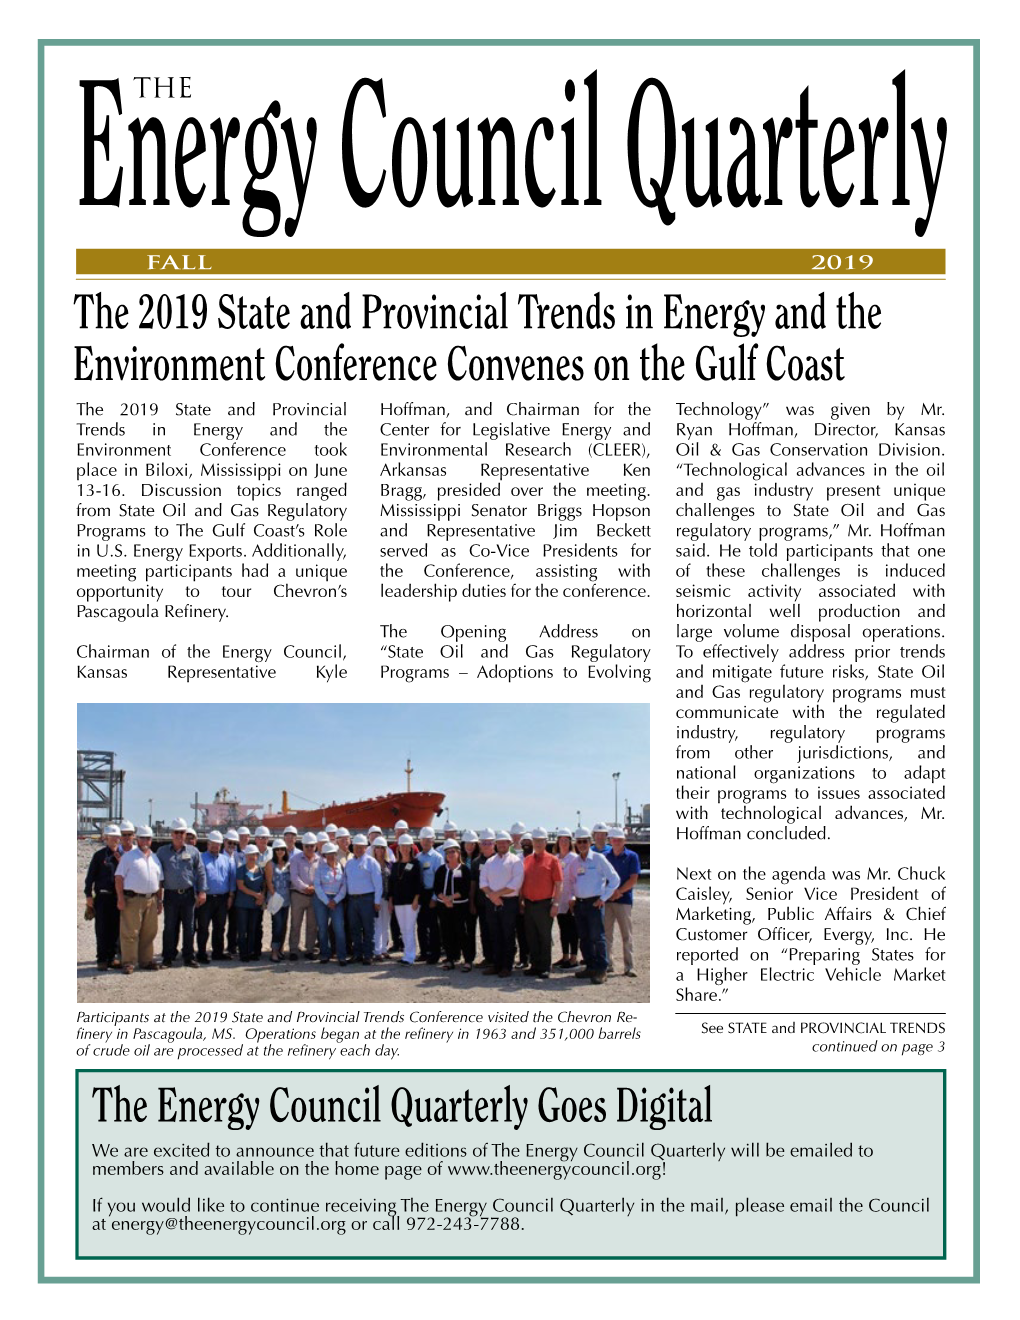 The 2019 State and Provincial Trends in Energy and the Environment